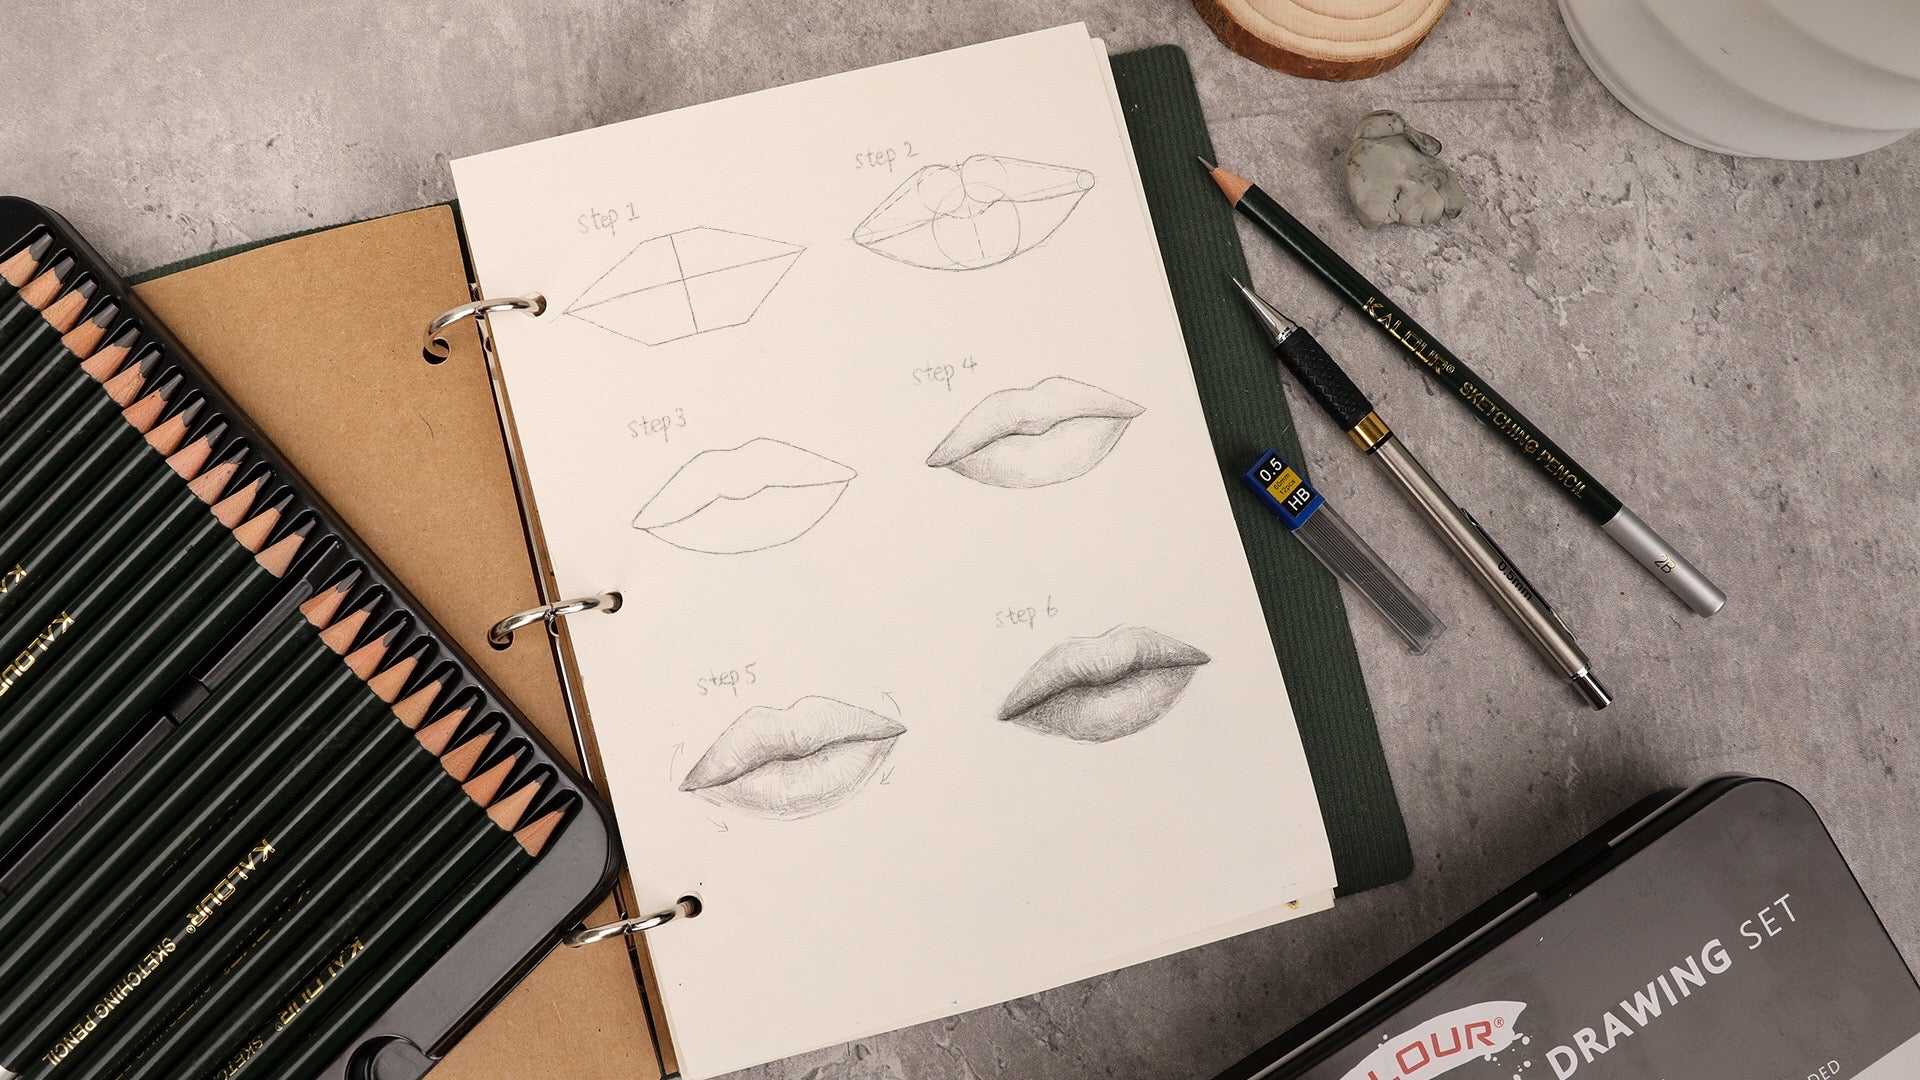 👀 Body parts 👀  Mouth drawing, Lips drawing, Drawing tutorial